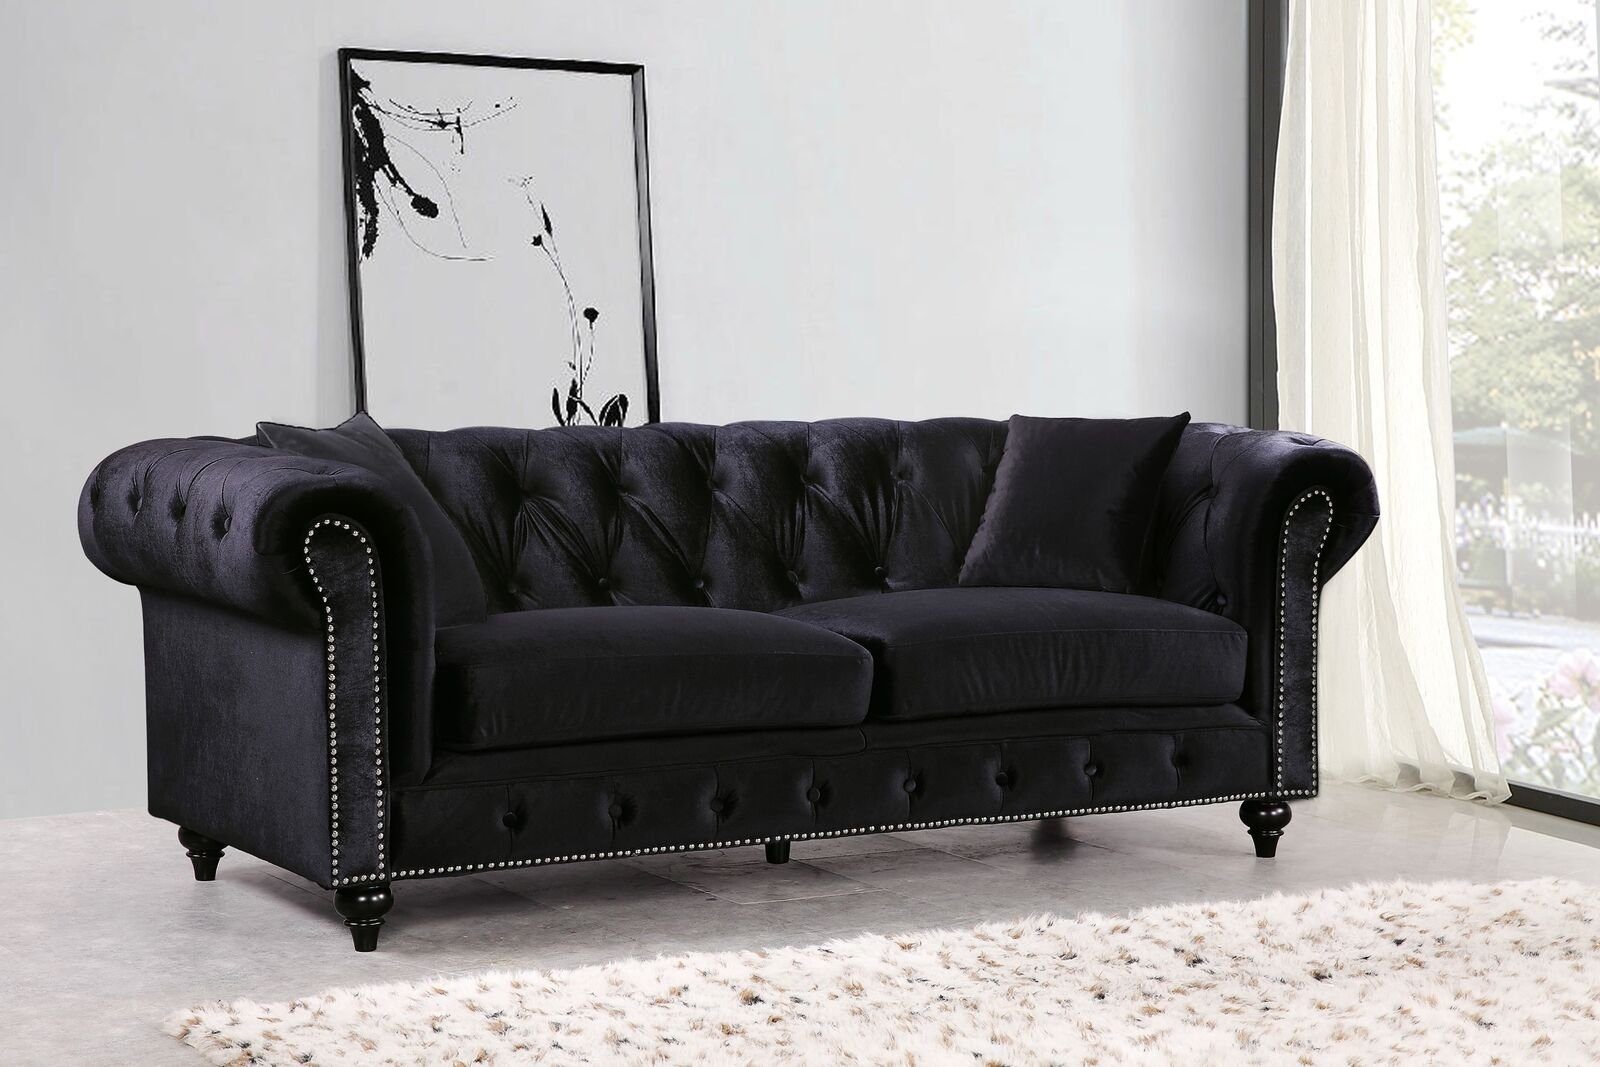 JVmoebel Chesterfield-Sofa, Chesterfield Design Luxus Sofa Polster Couch